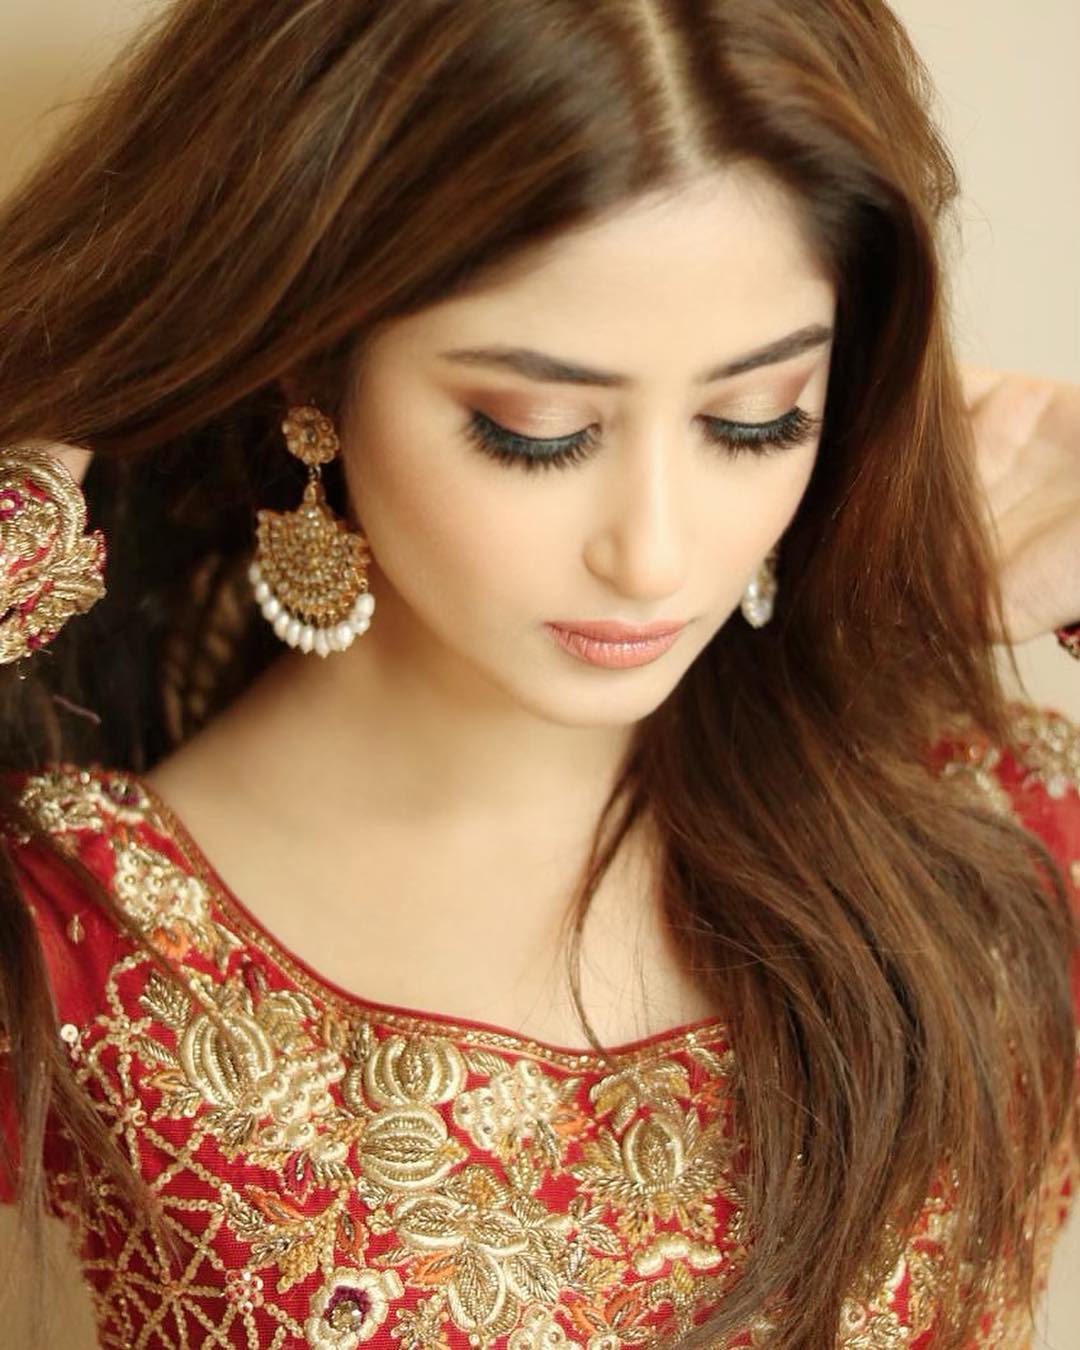 Check Innocent & Cool New Pictures of Awesome Actress Sajal Ali